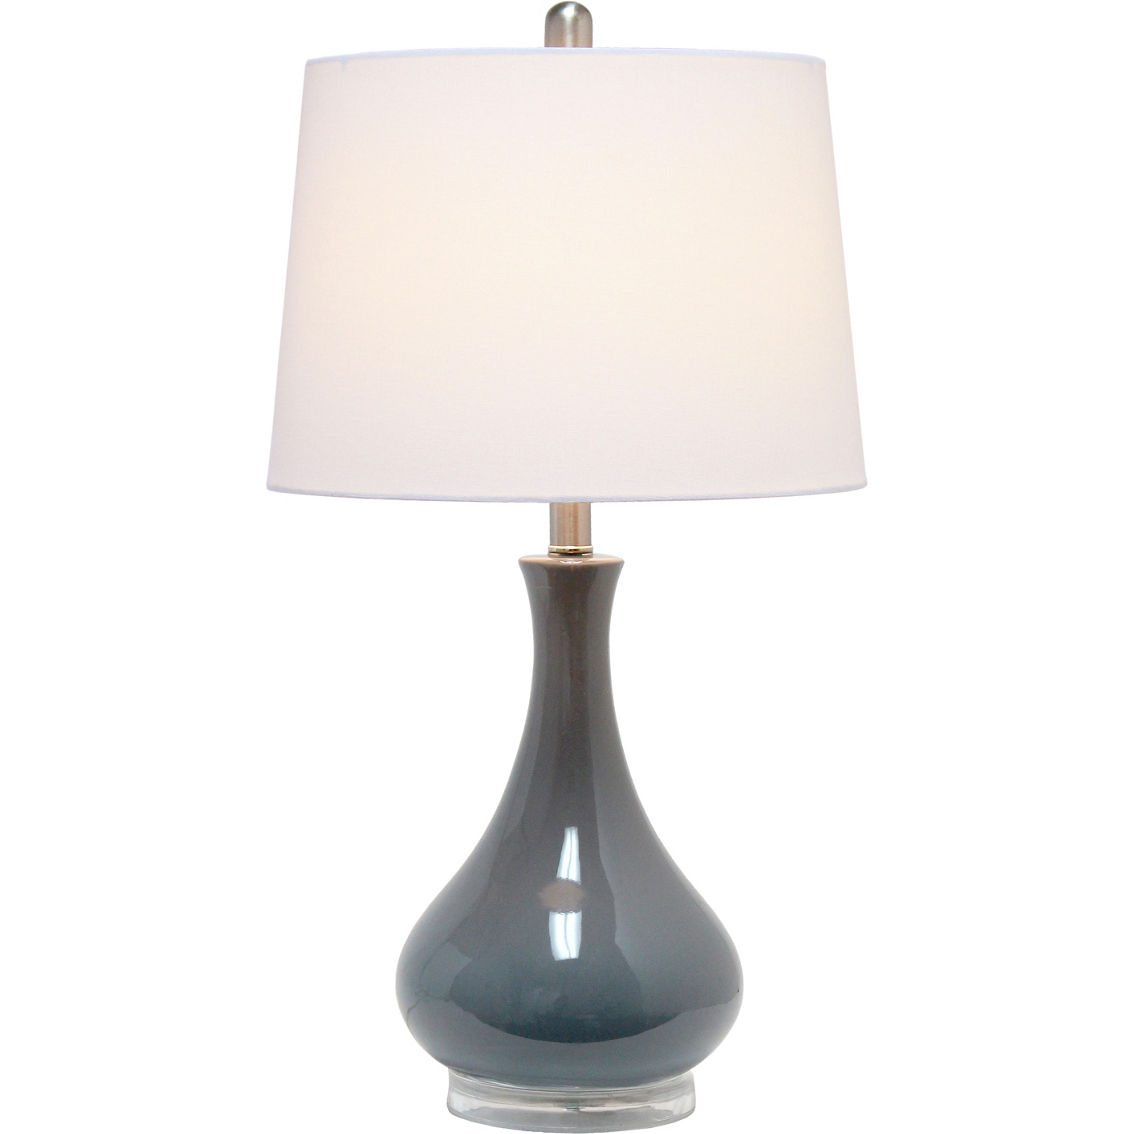 Lalia Home Droplet Table Lamp with Fabric Shade - Image 2 of 8